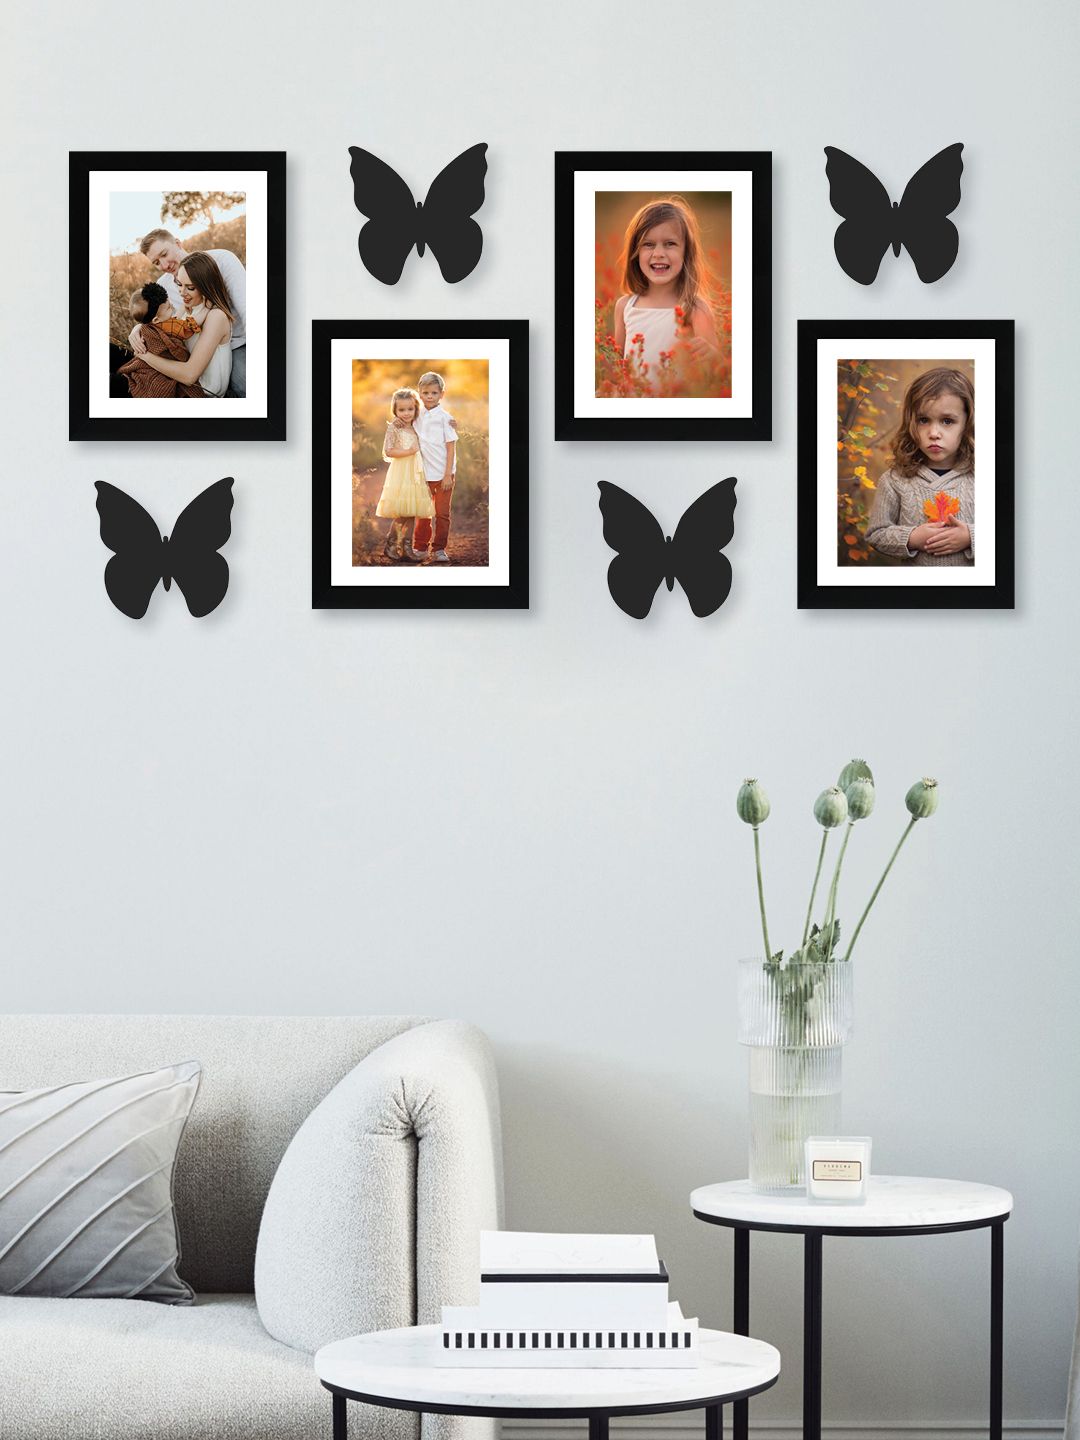 RANDOM Set of 4 Black Solid New Synthetic Photo Frames with Butterfly Plaques Price in India